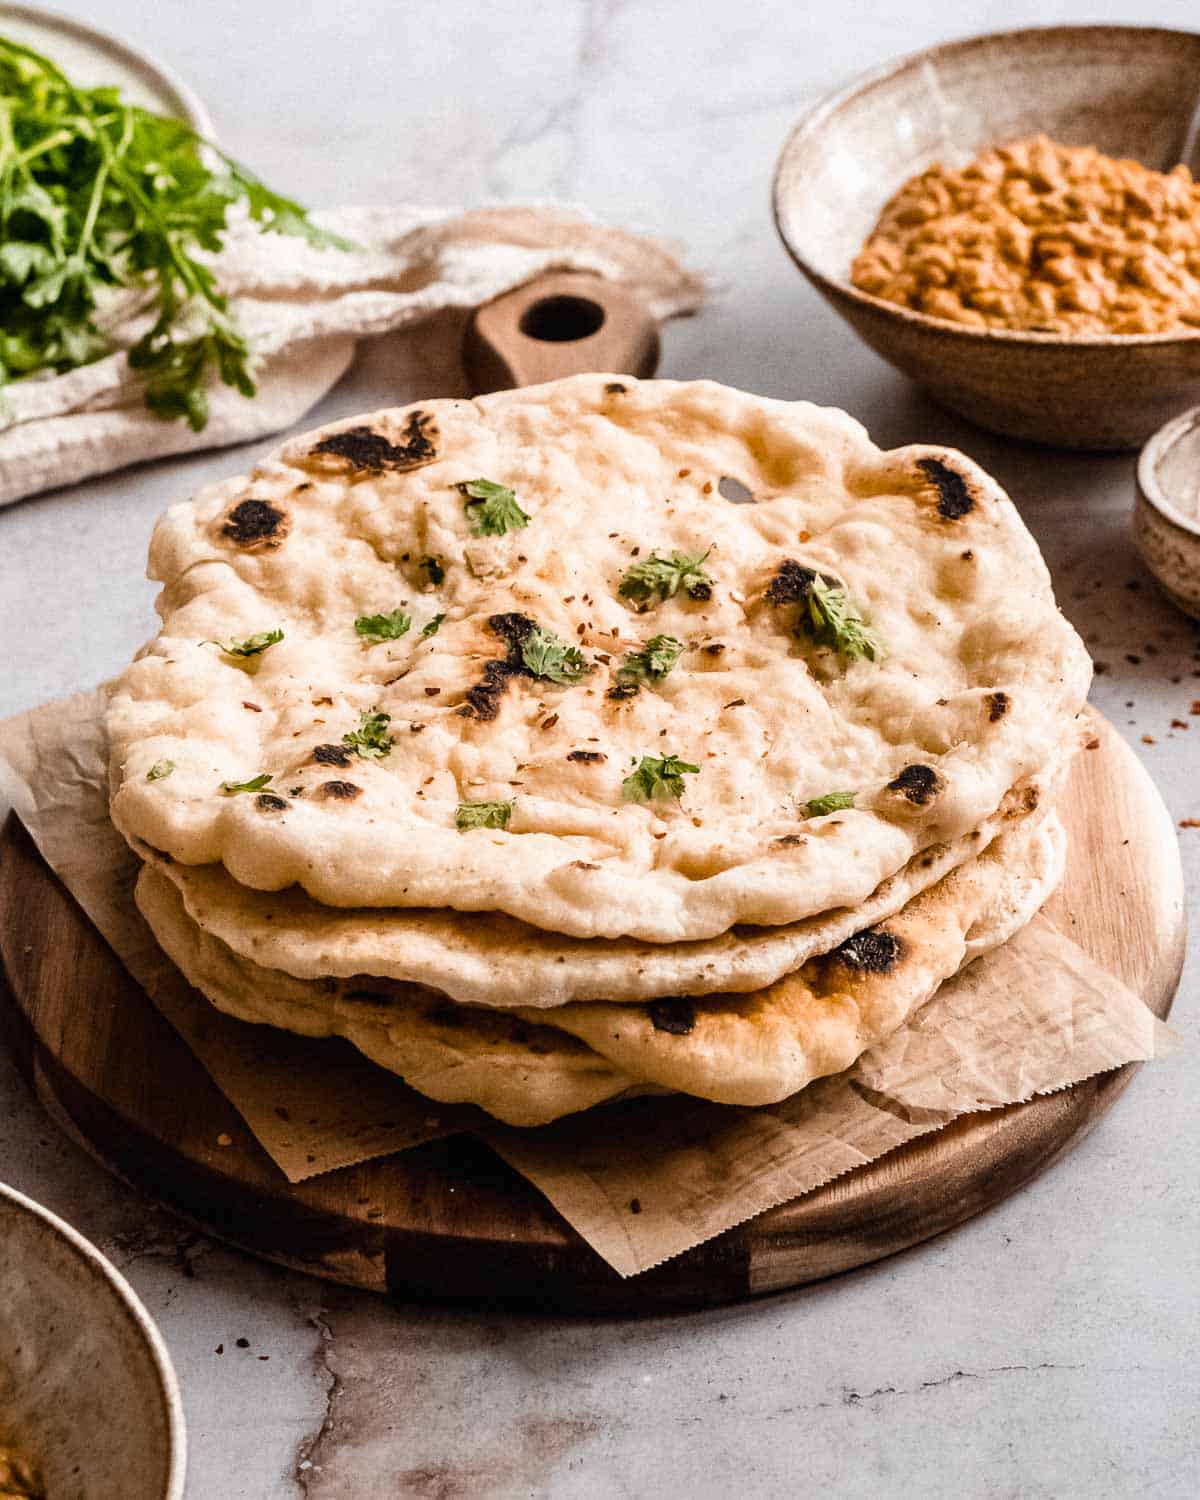 stack of naan bread on a wooden board.